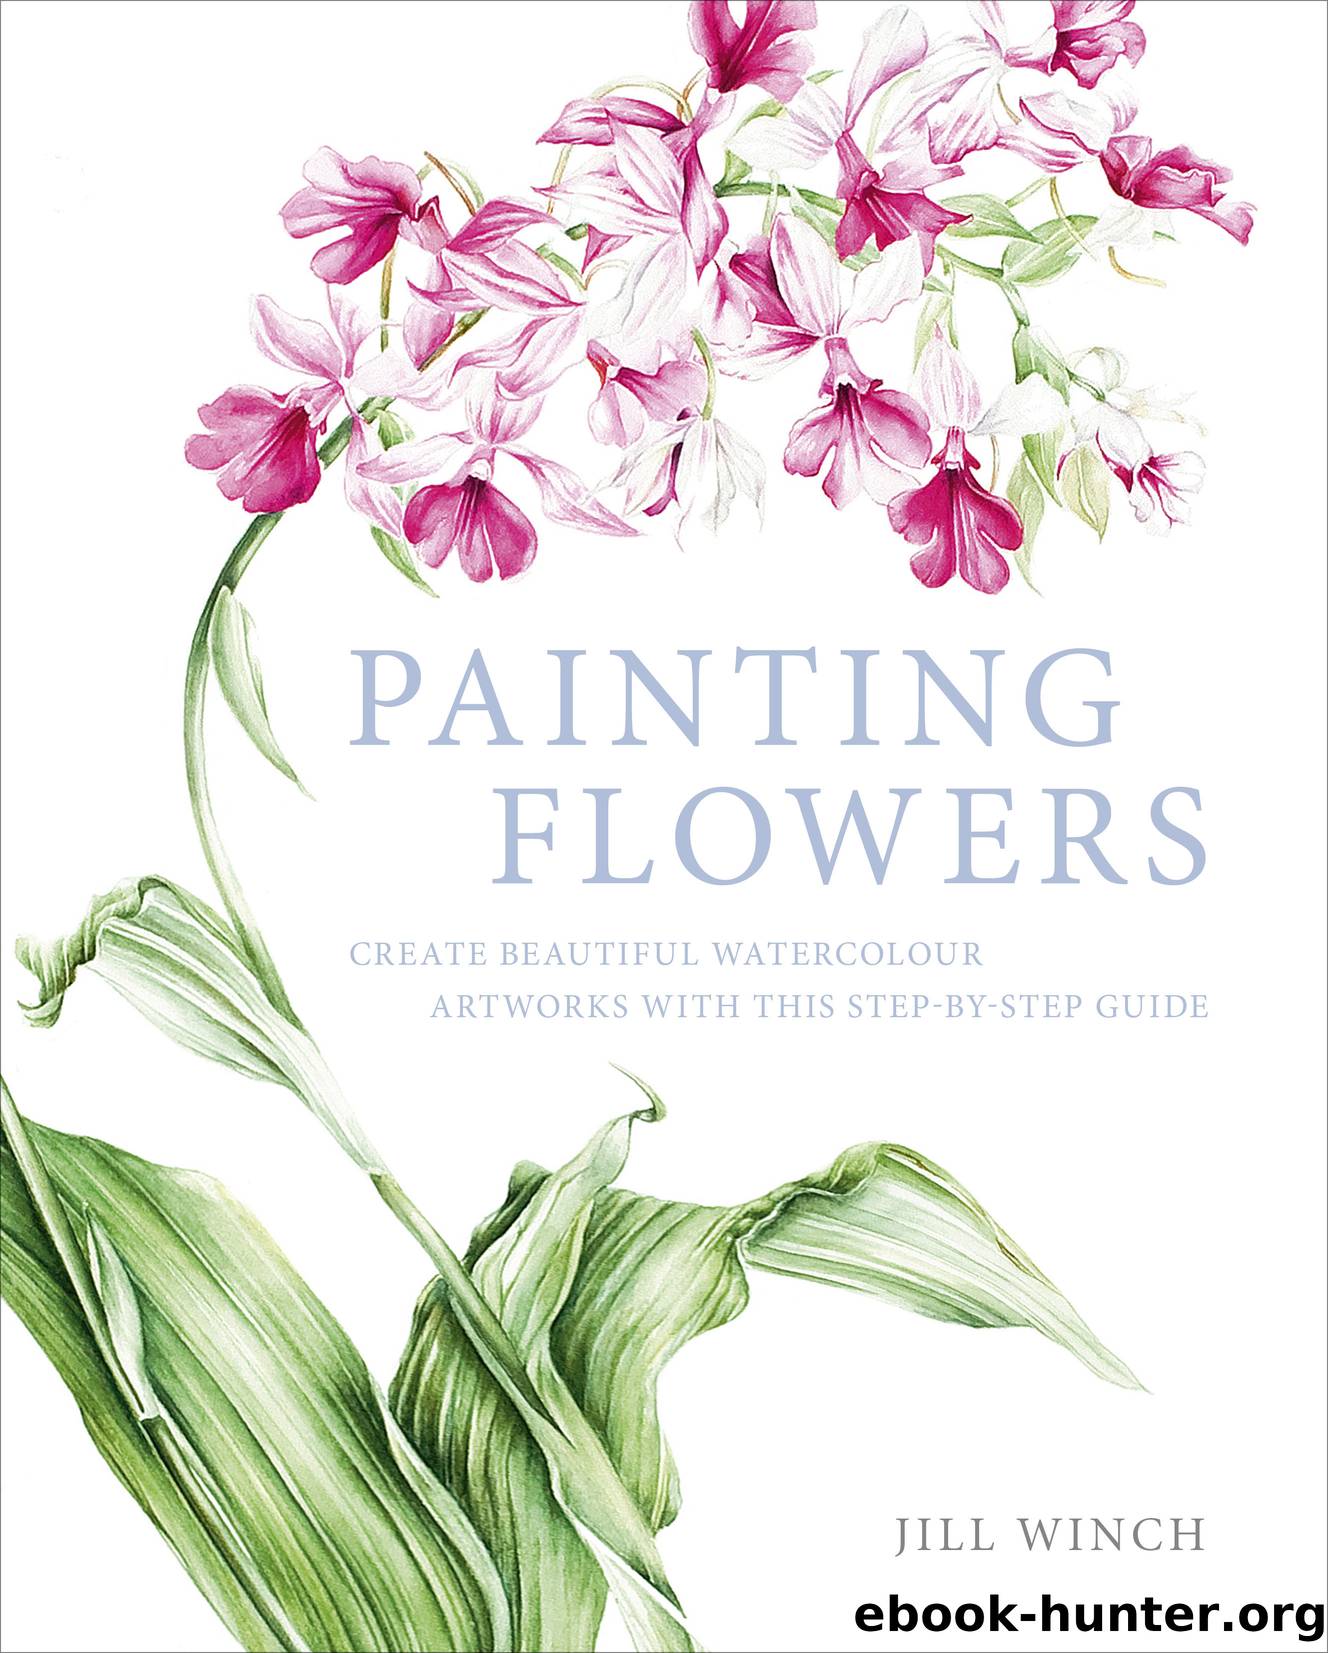 Painting Flowers by Jill Winch